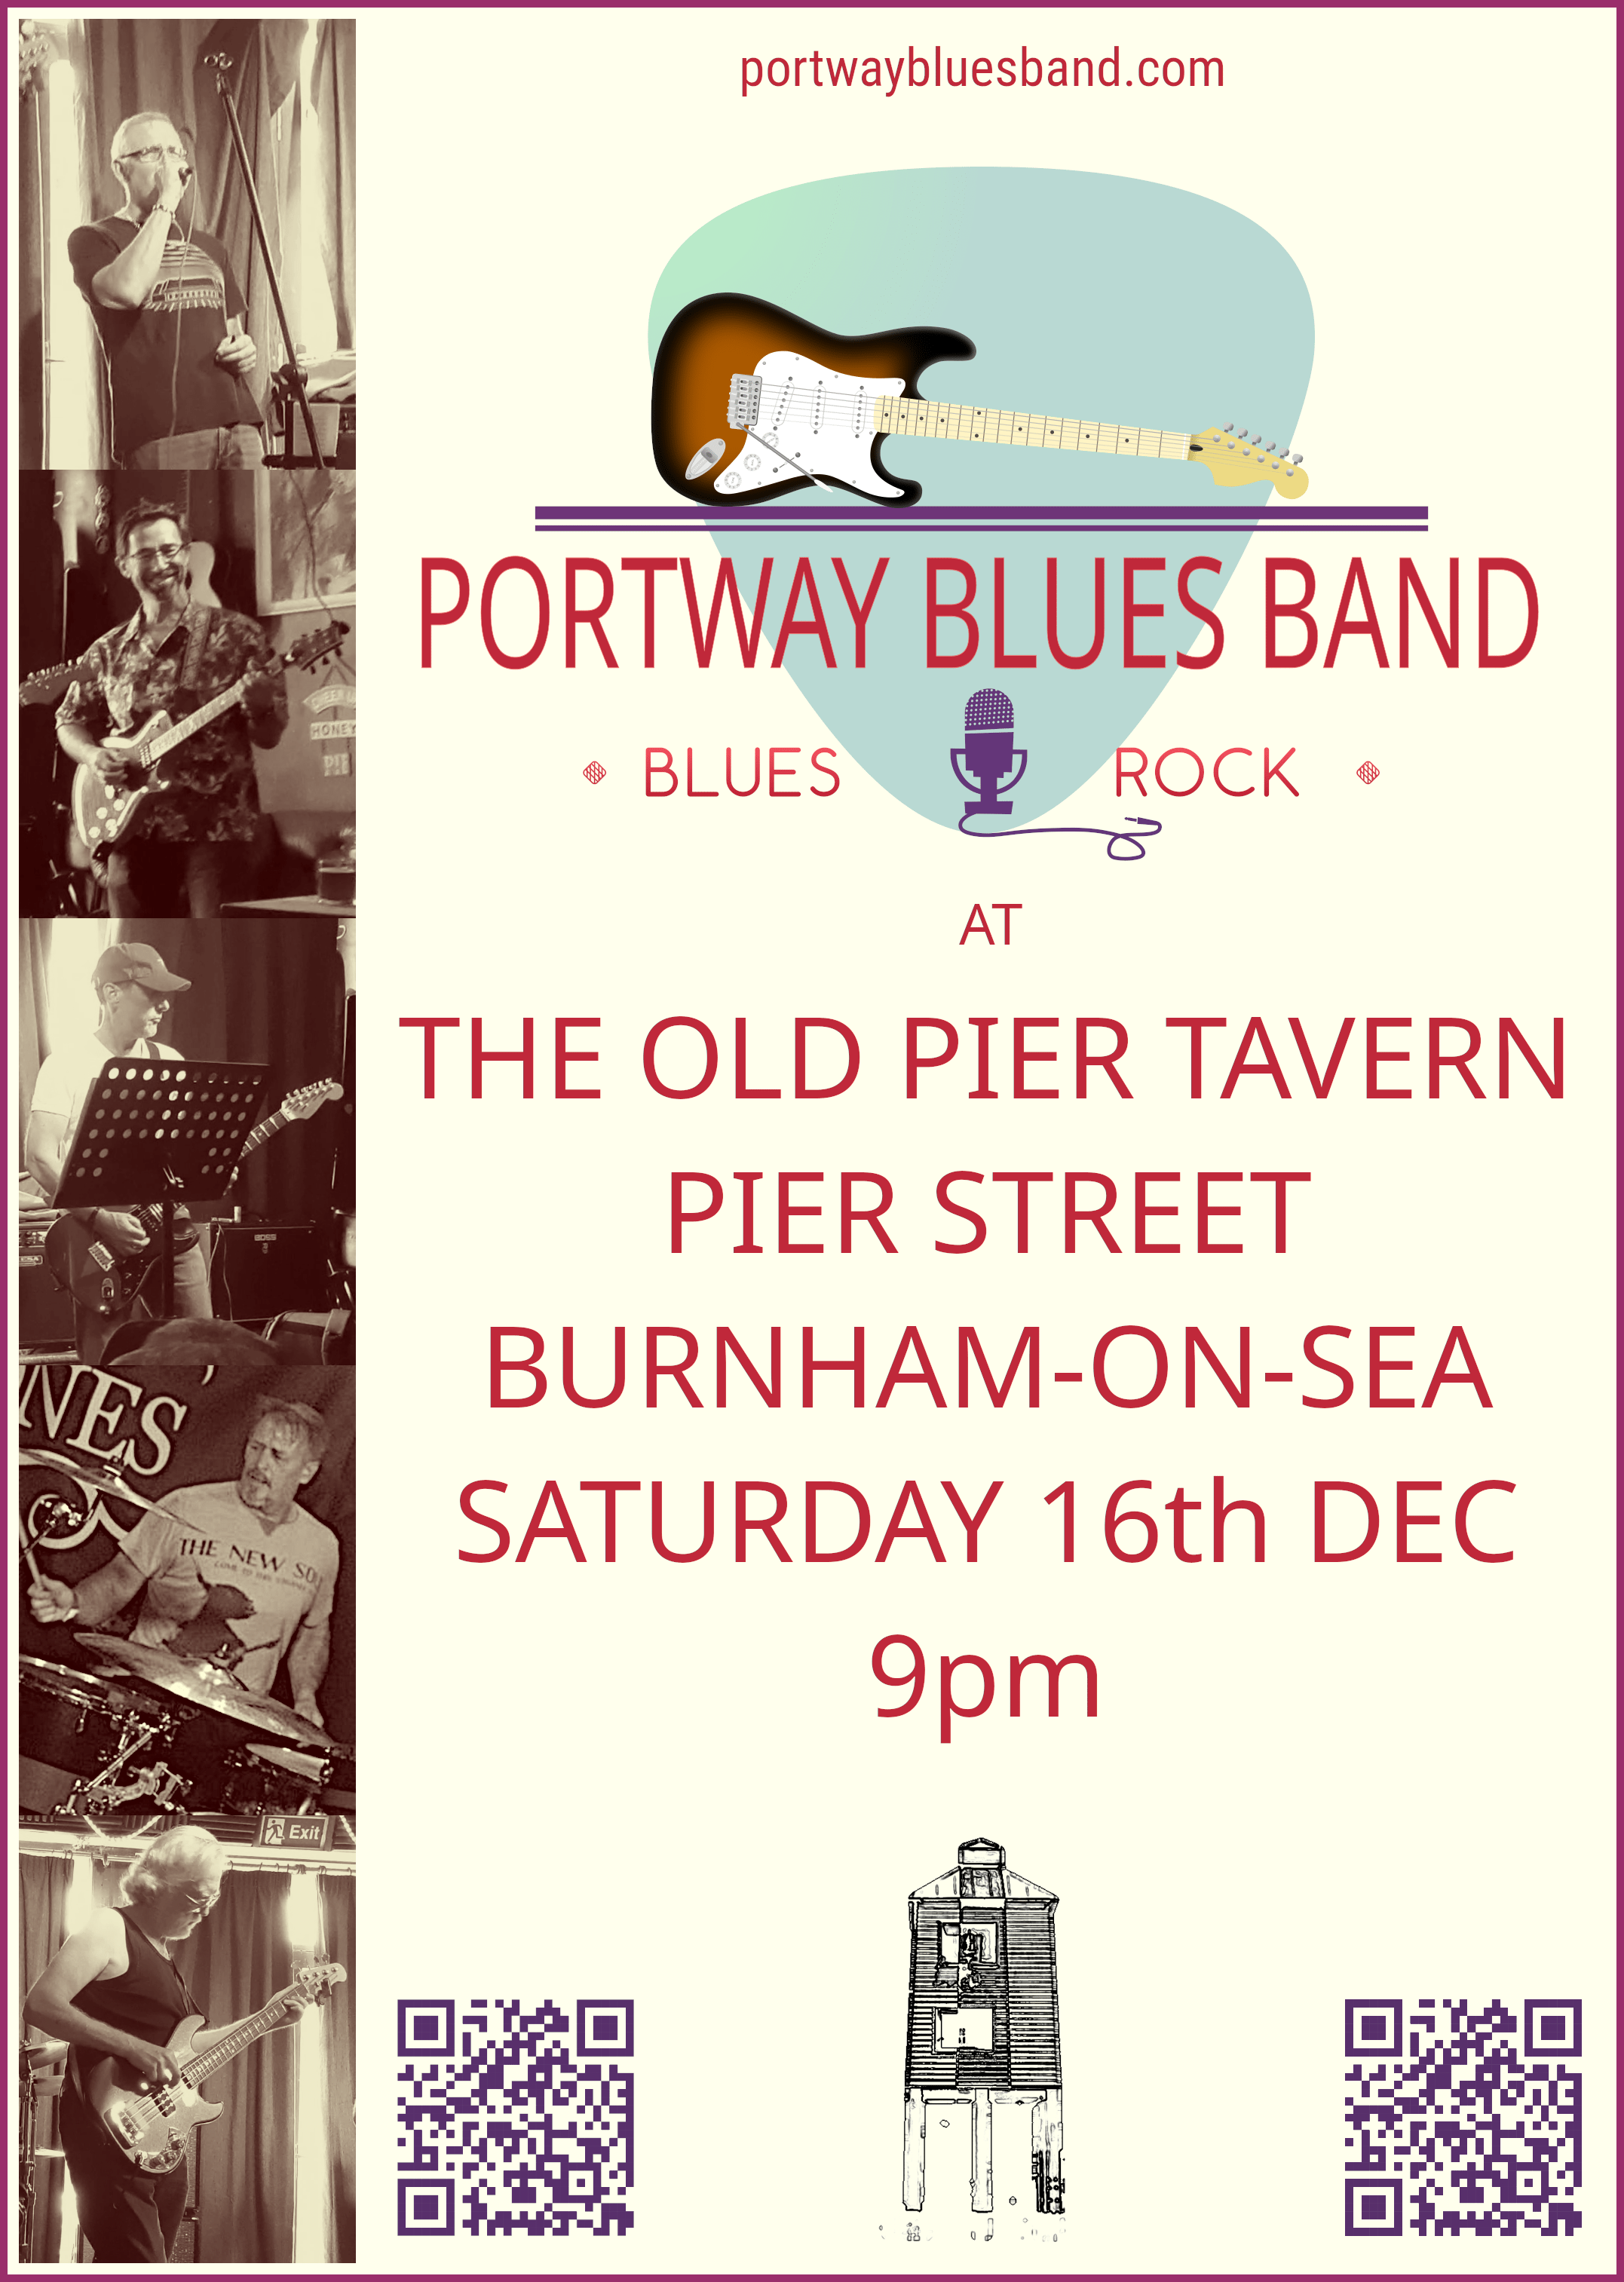 Portway Blues Band gig poster for a gig at The Old Pier Tavern, Burnham-on-Sea, Saturday 16th December 2023